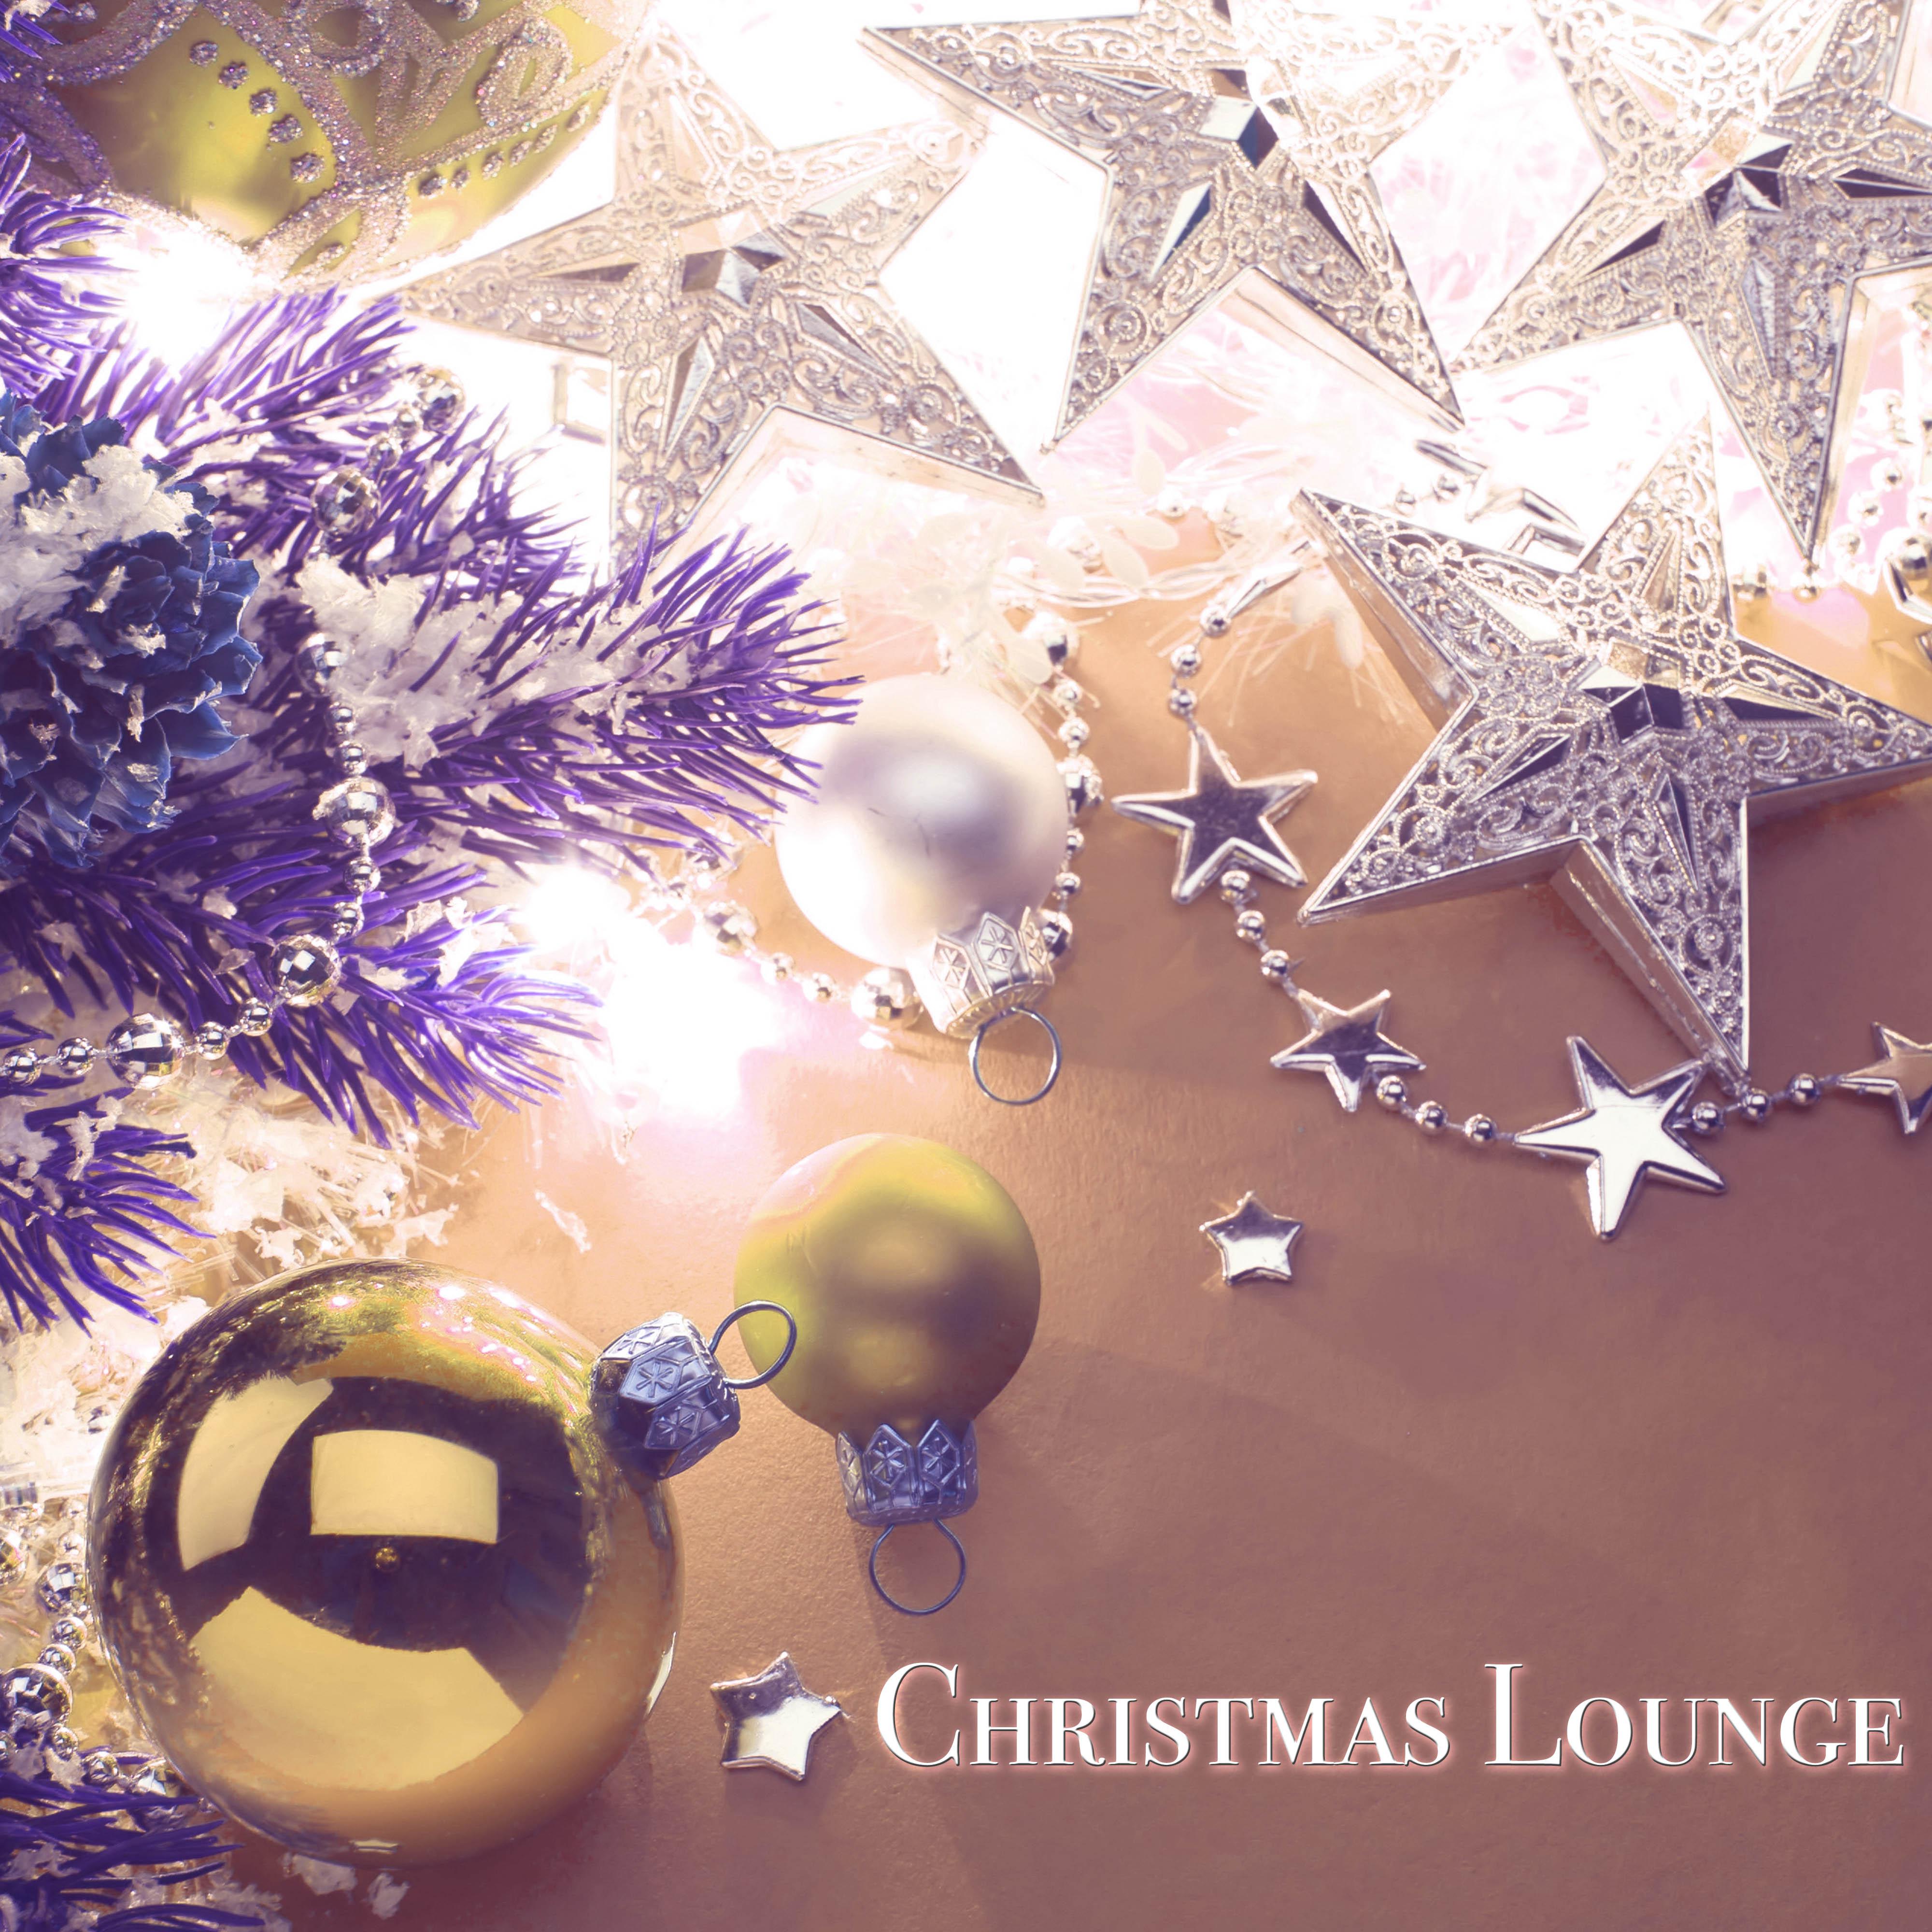 Christmas Lounge - Best 15 Party and Dinner Tracks for Christmas